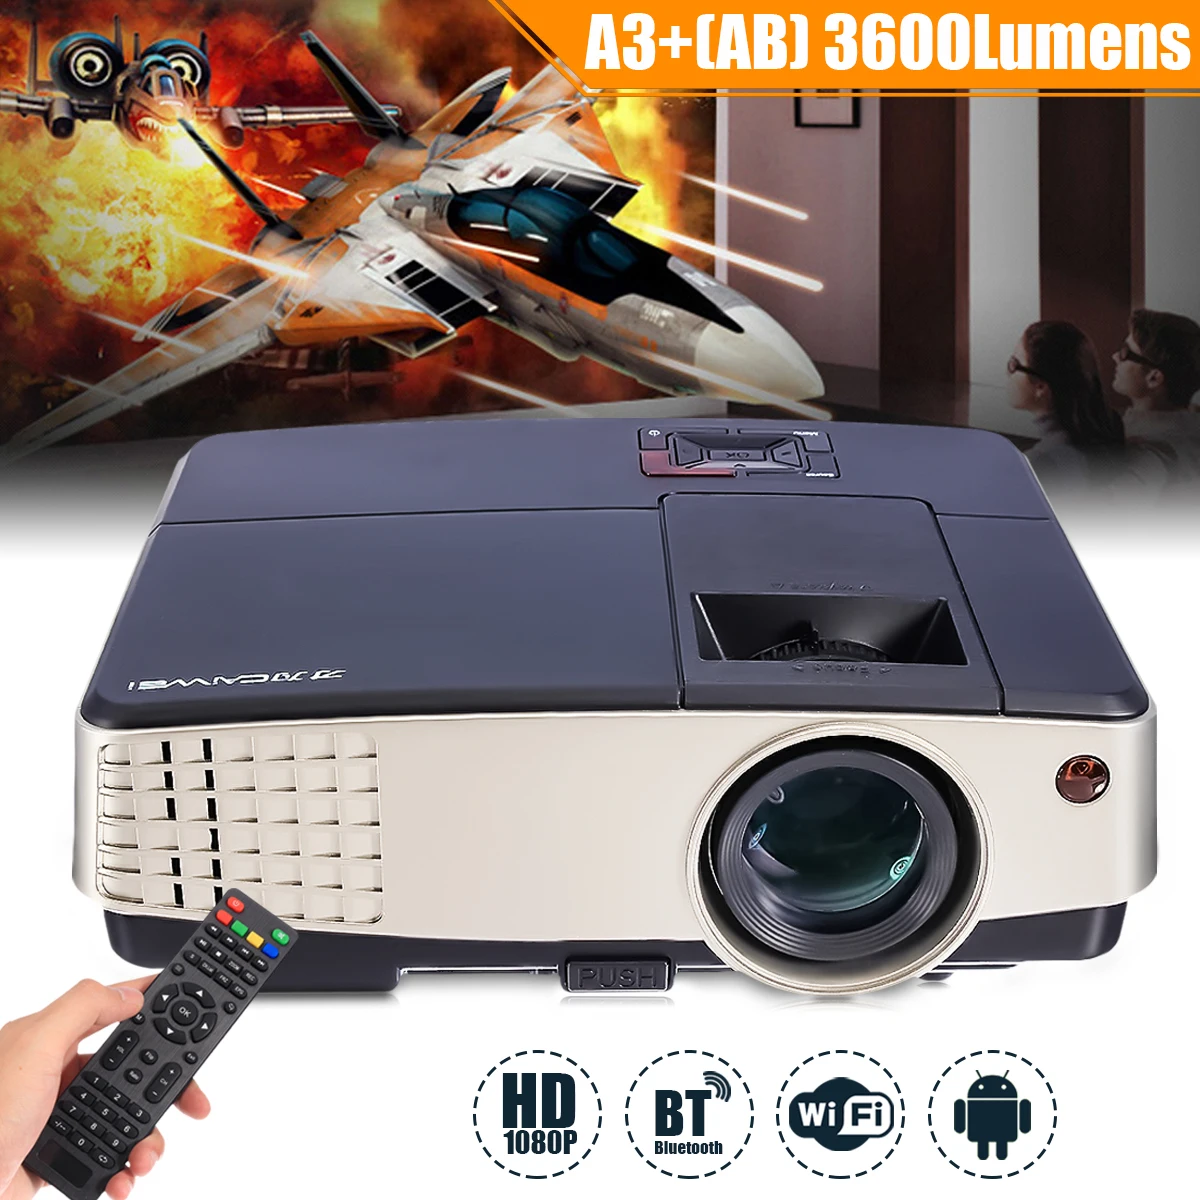 

3600 Lumens A3+AB Projector 1080P Full HD LCD Wifi Home Theater Cinema 72W LED Android 4.4 Bluetooth Multimedia Beamer